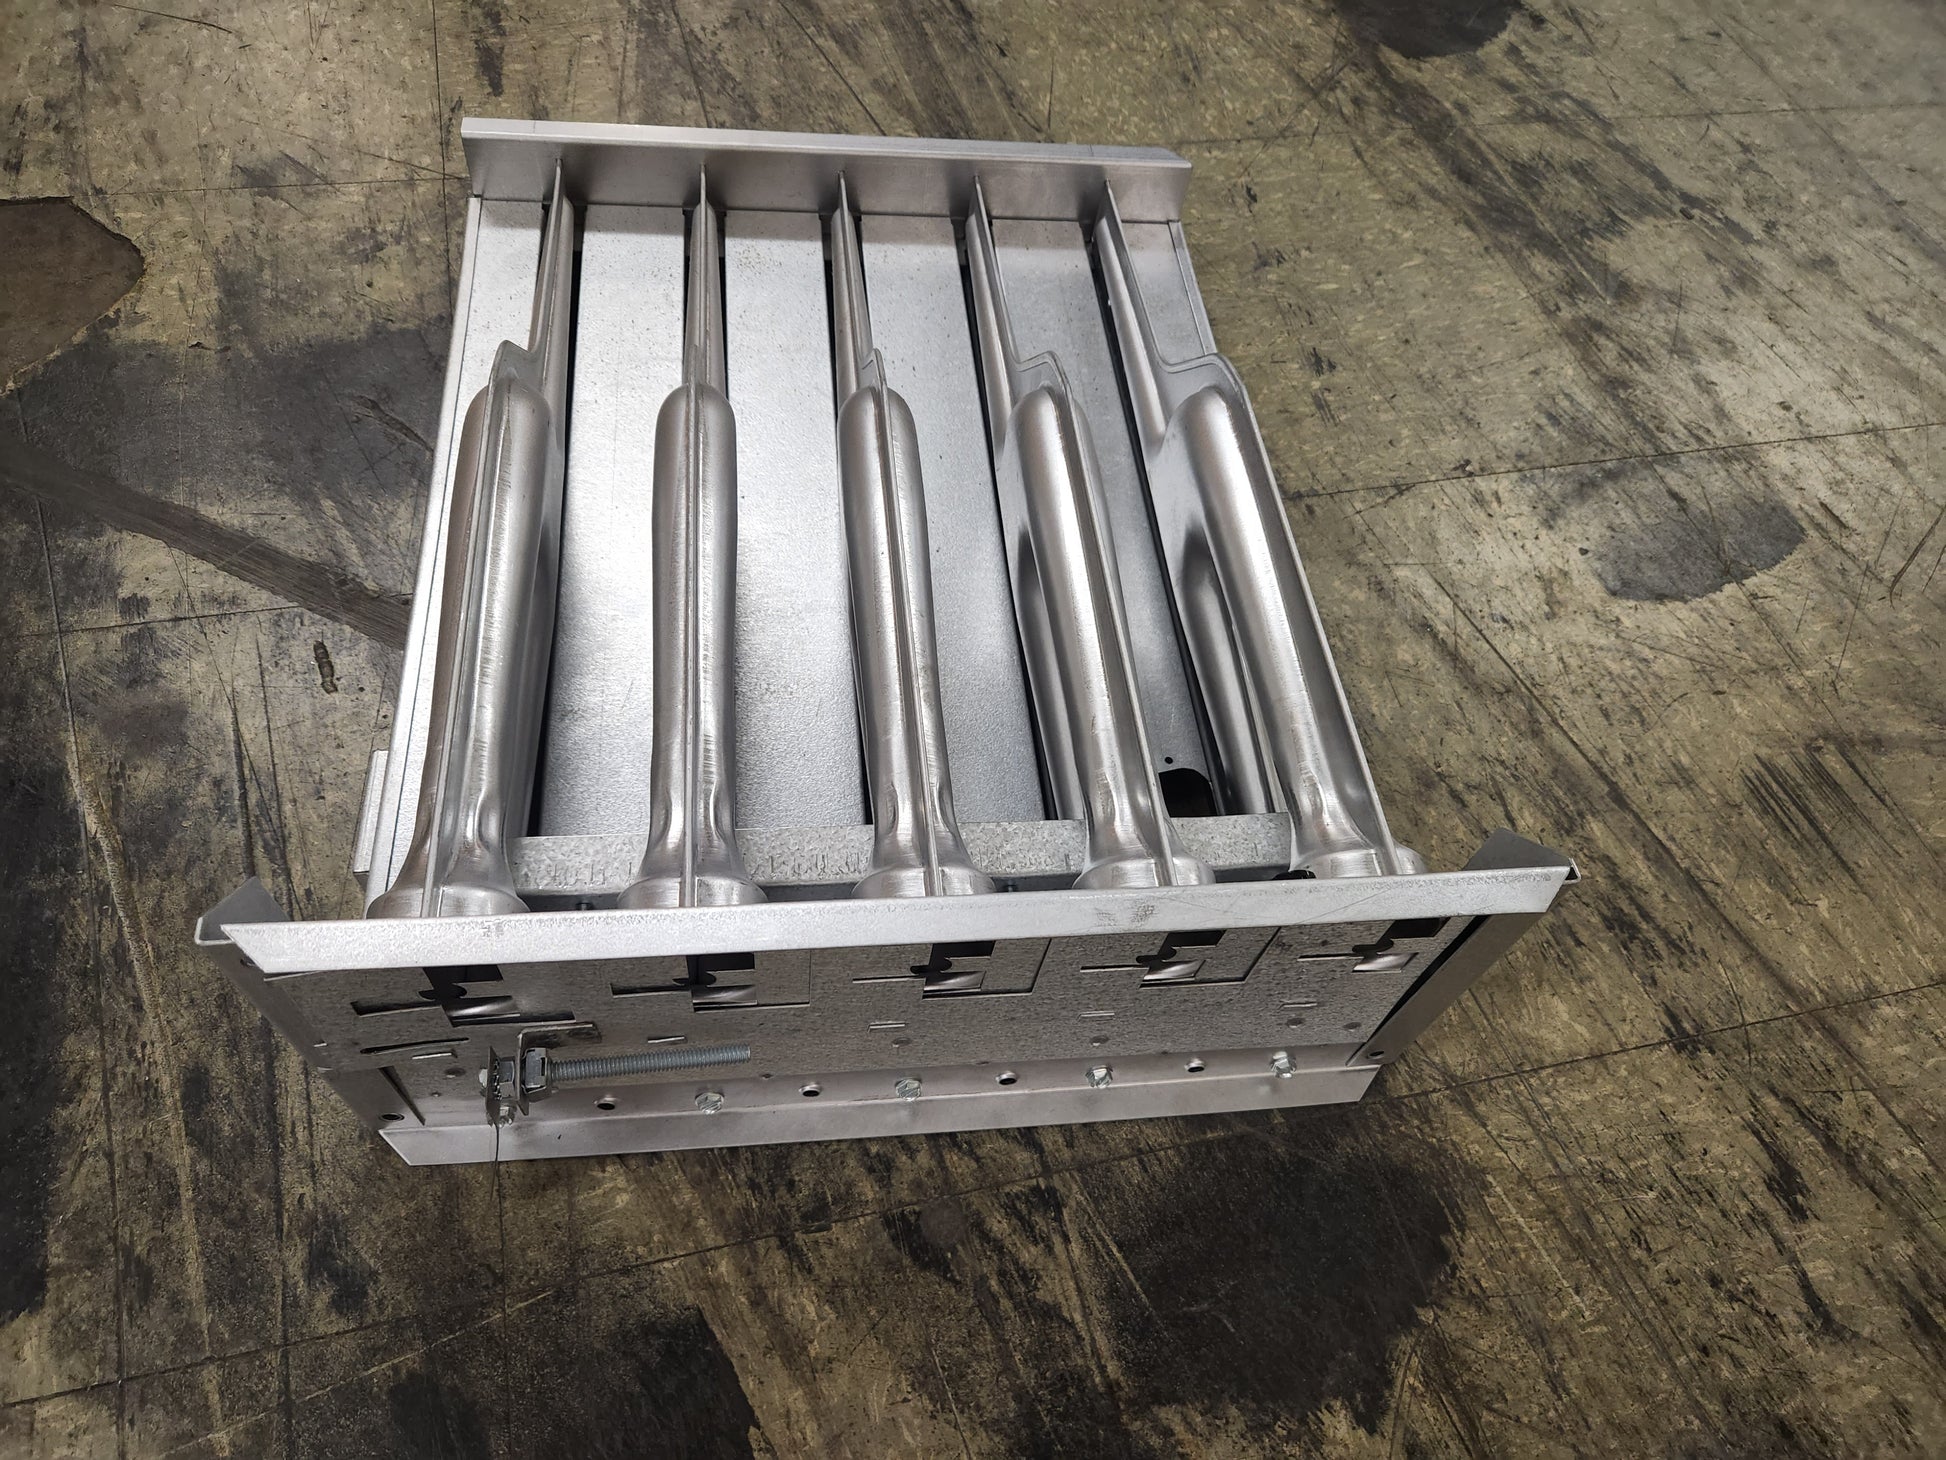 5 CELL HEAT EXCHANGER